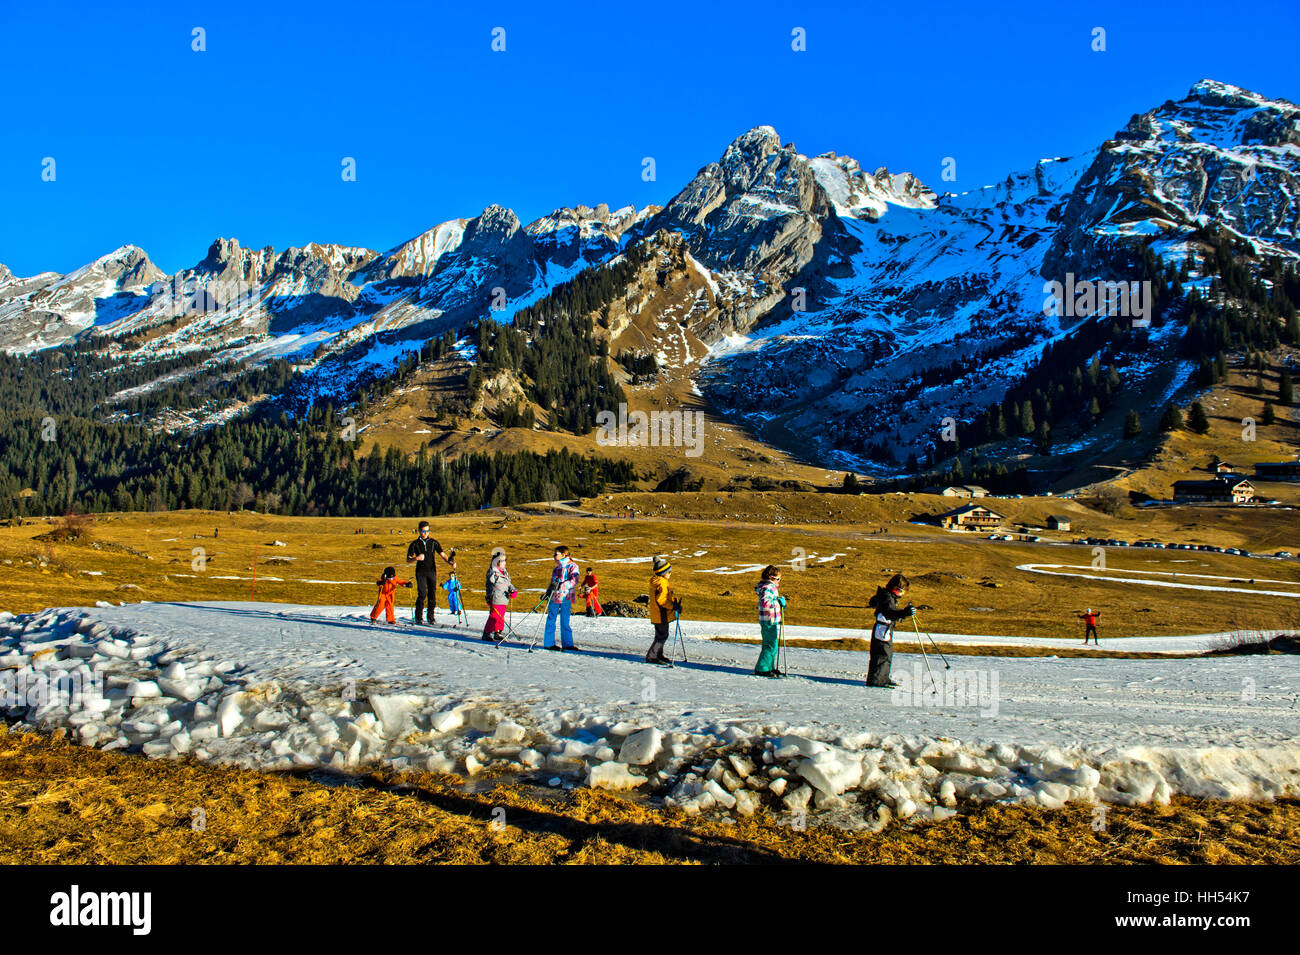 Group of kids practicising cross-country skiing on runs made of artificial snow, La Clusaz, Haute-Savoie, France Stock Photo